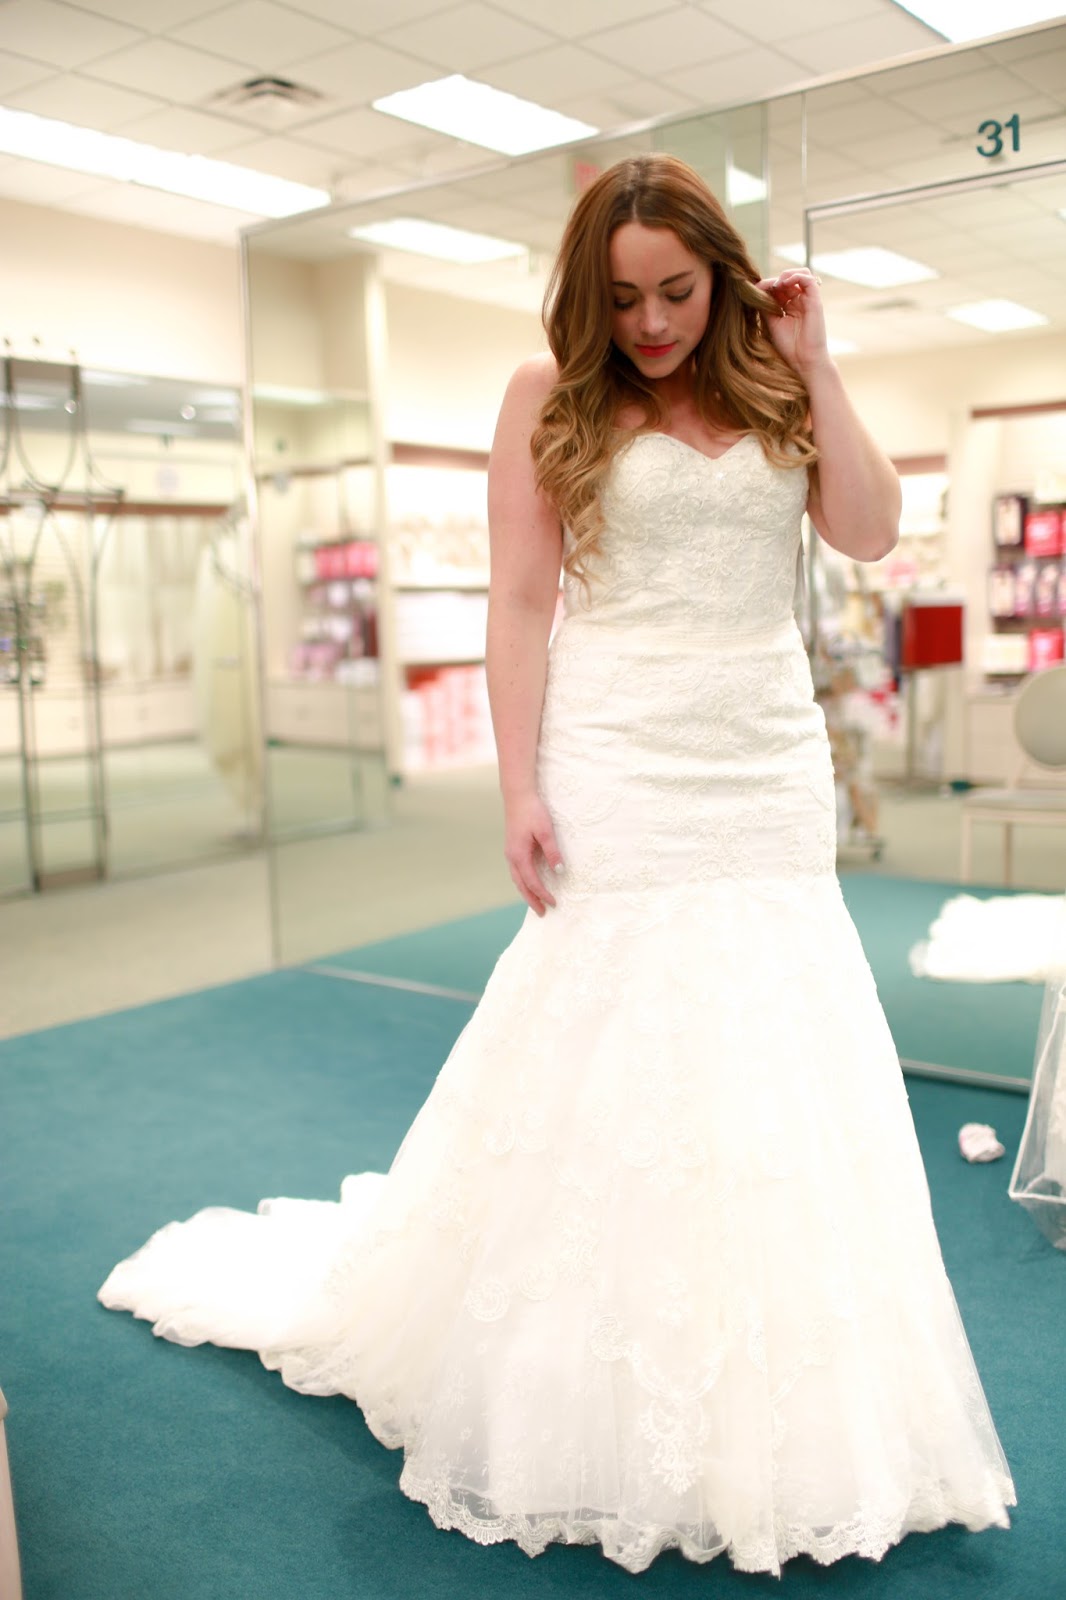 Meet The Stylist Experience at David's Bridal